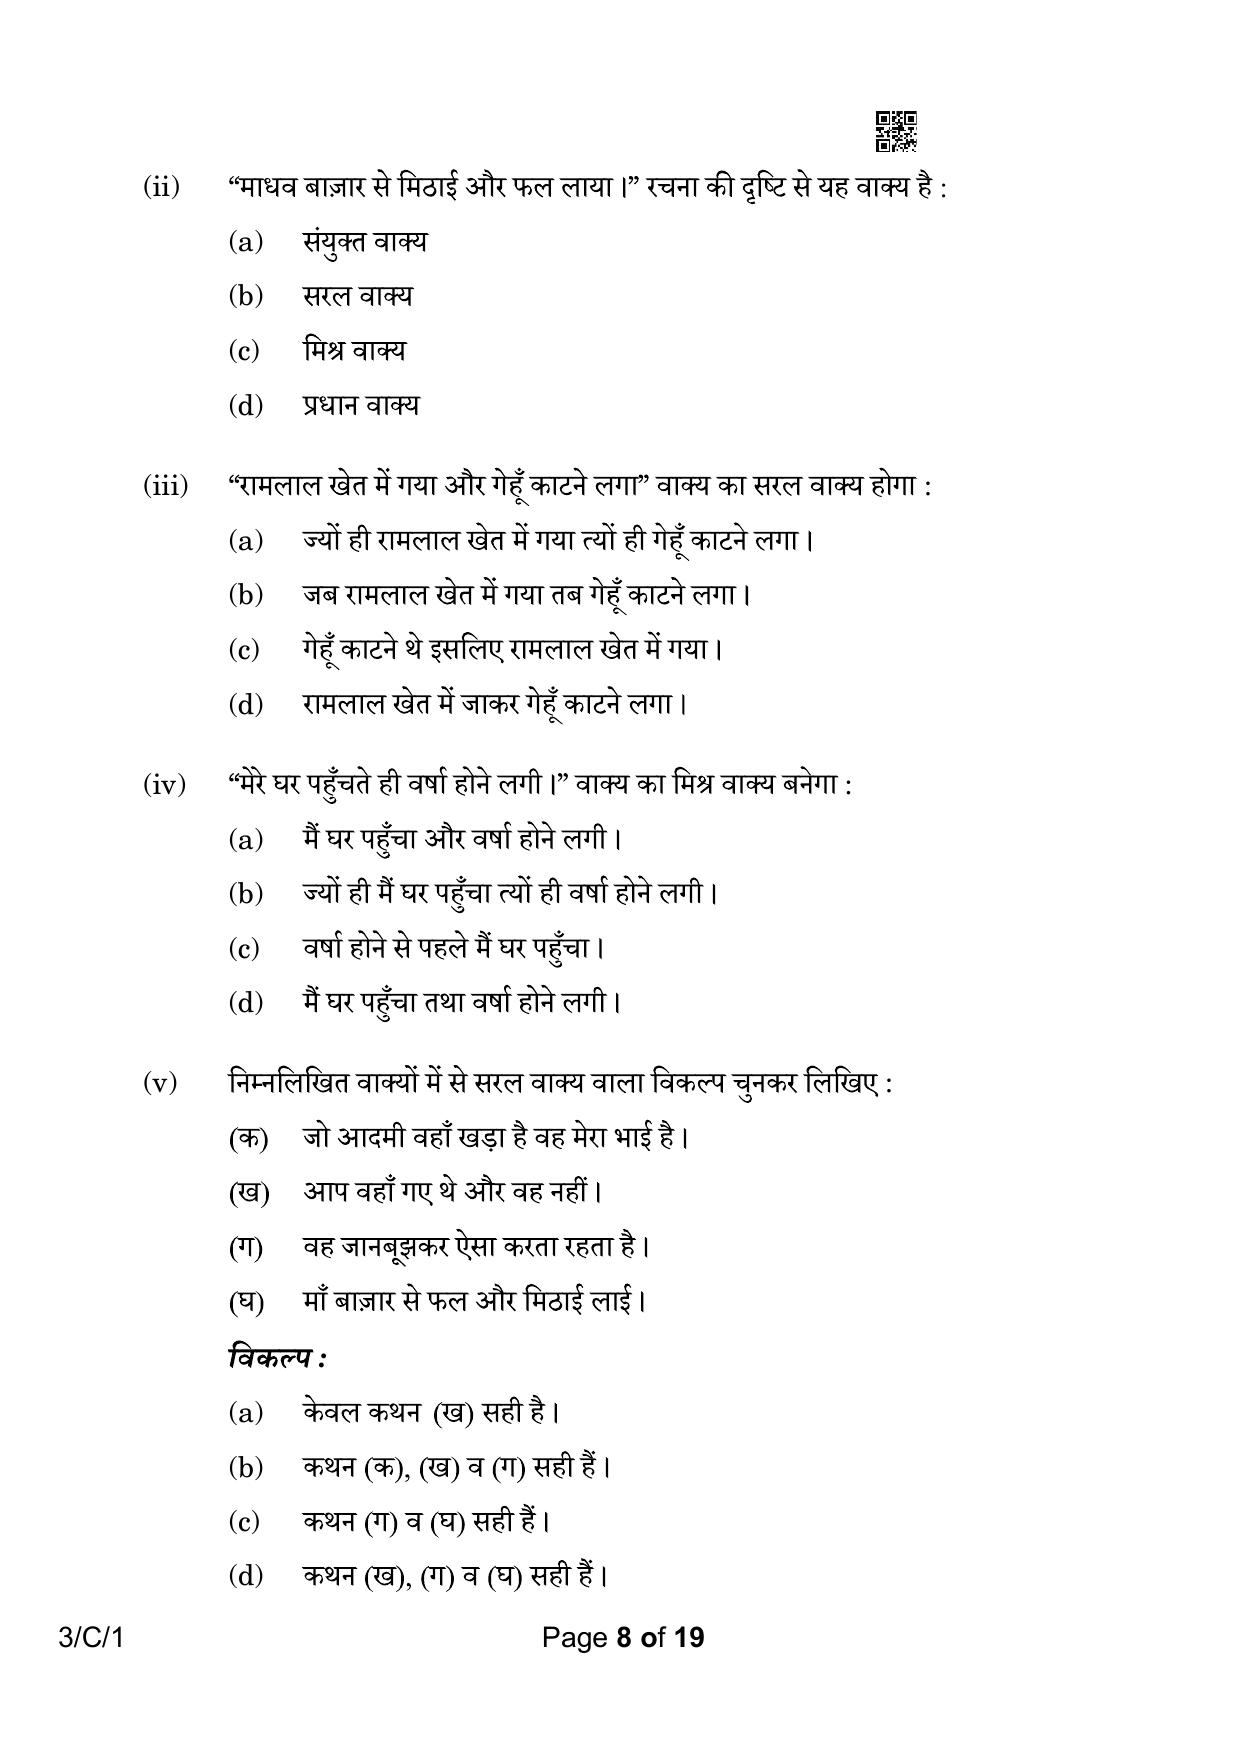 CBSE Class 10 3-1 Hindi A 2023 (Compartment) Question Paper - Page 8